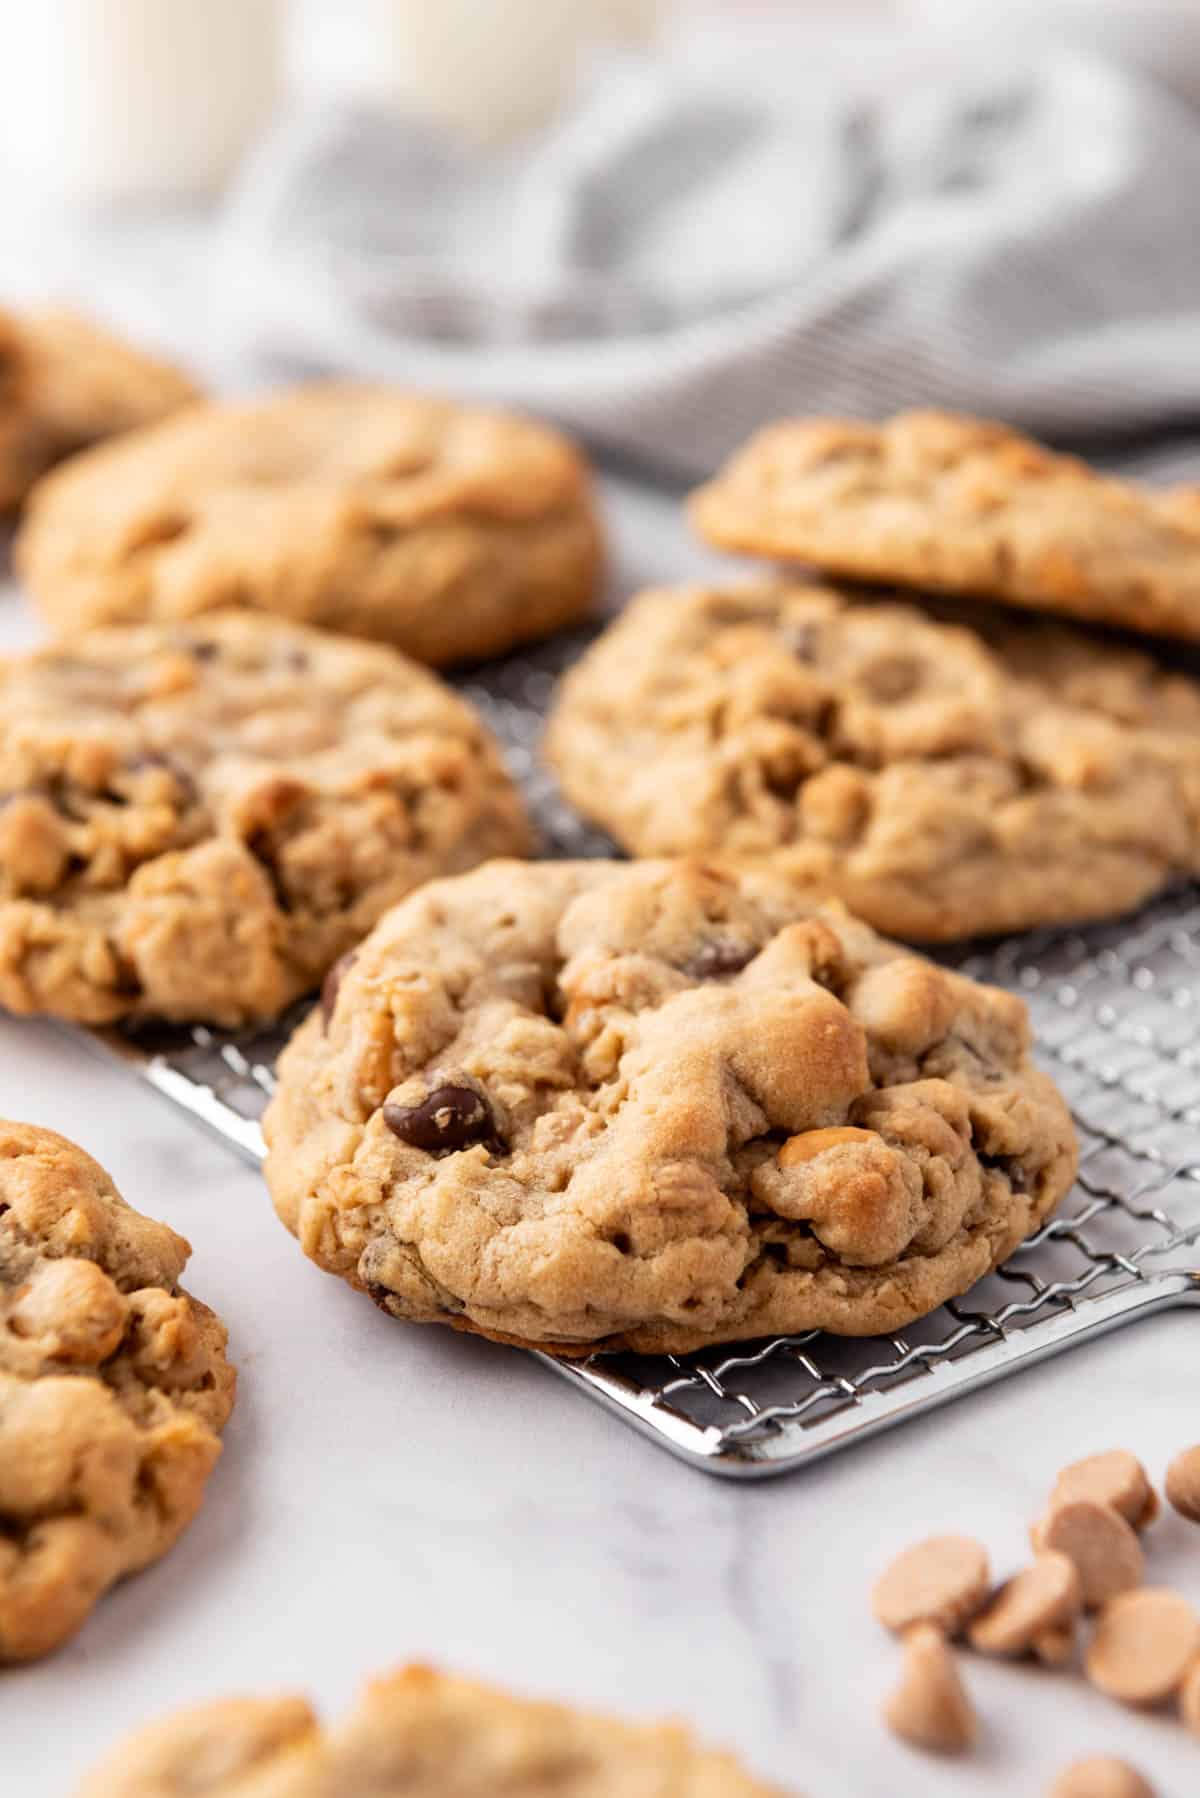 An image of thick peanut butter oatmeal butterscotch chocolate chip cookies on a wire rack.